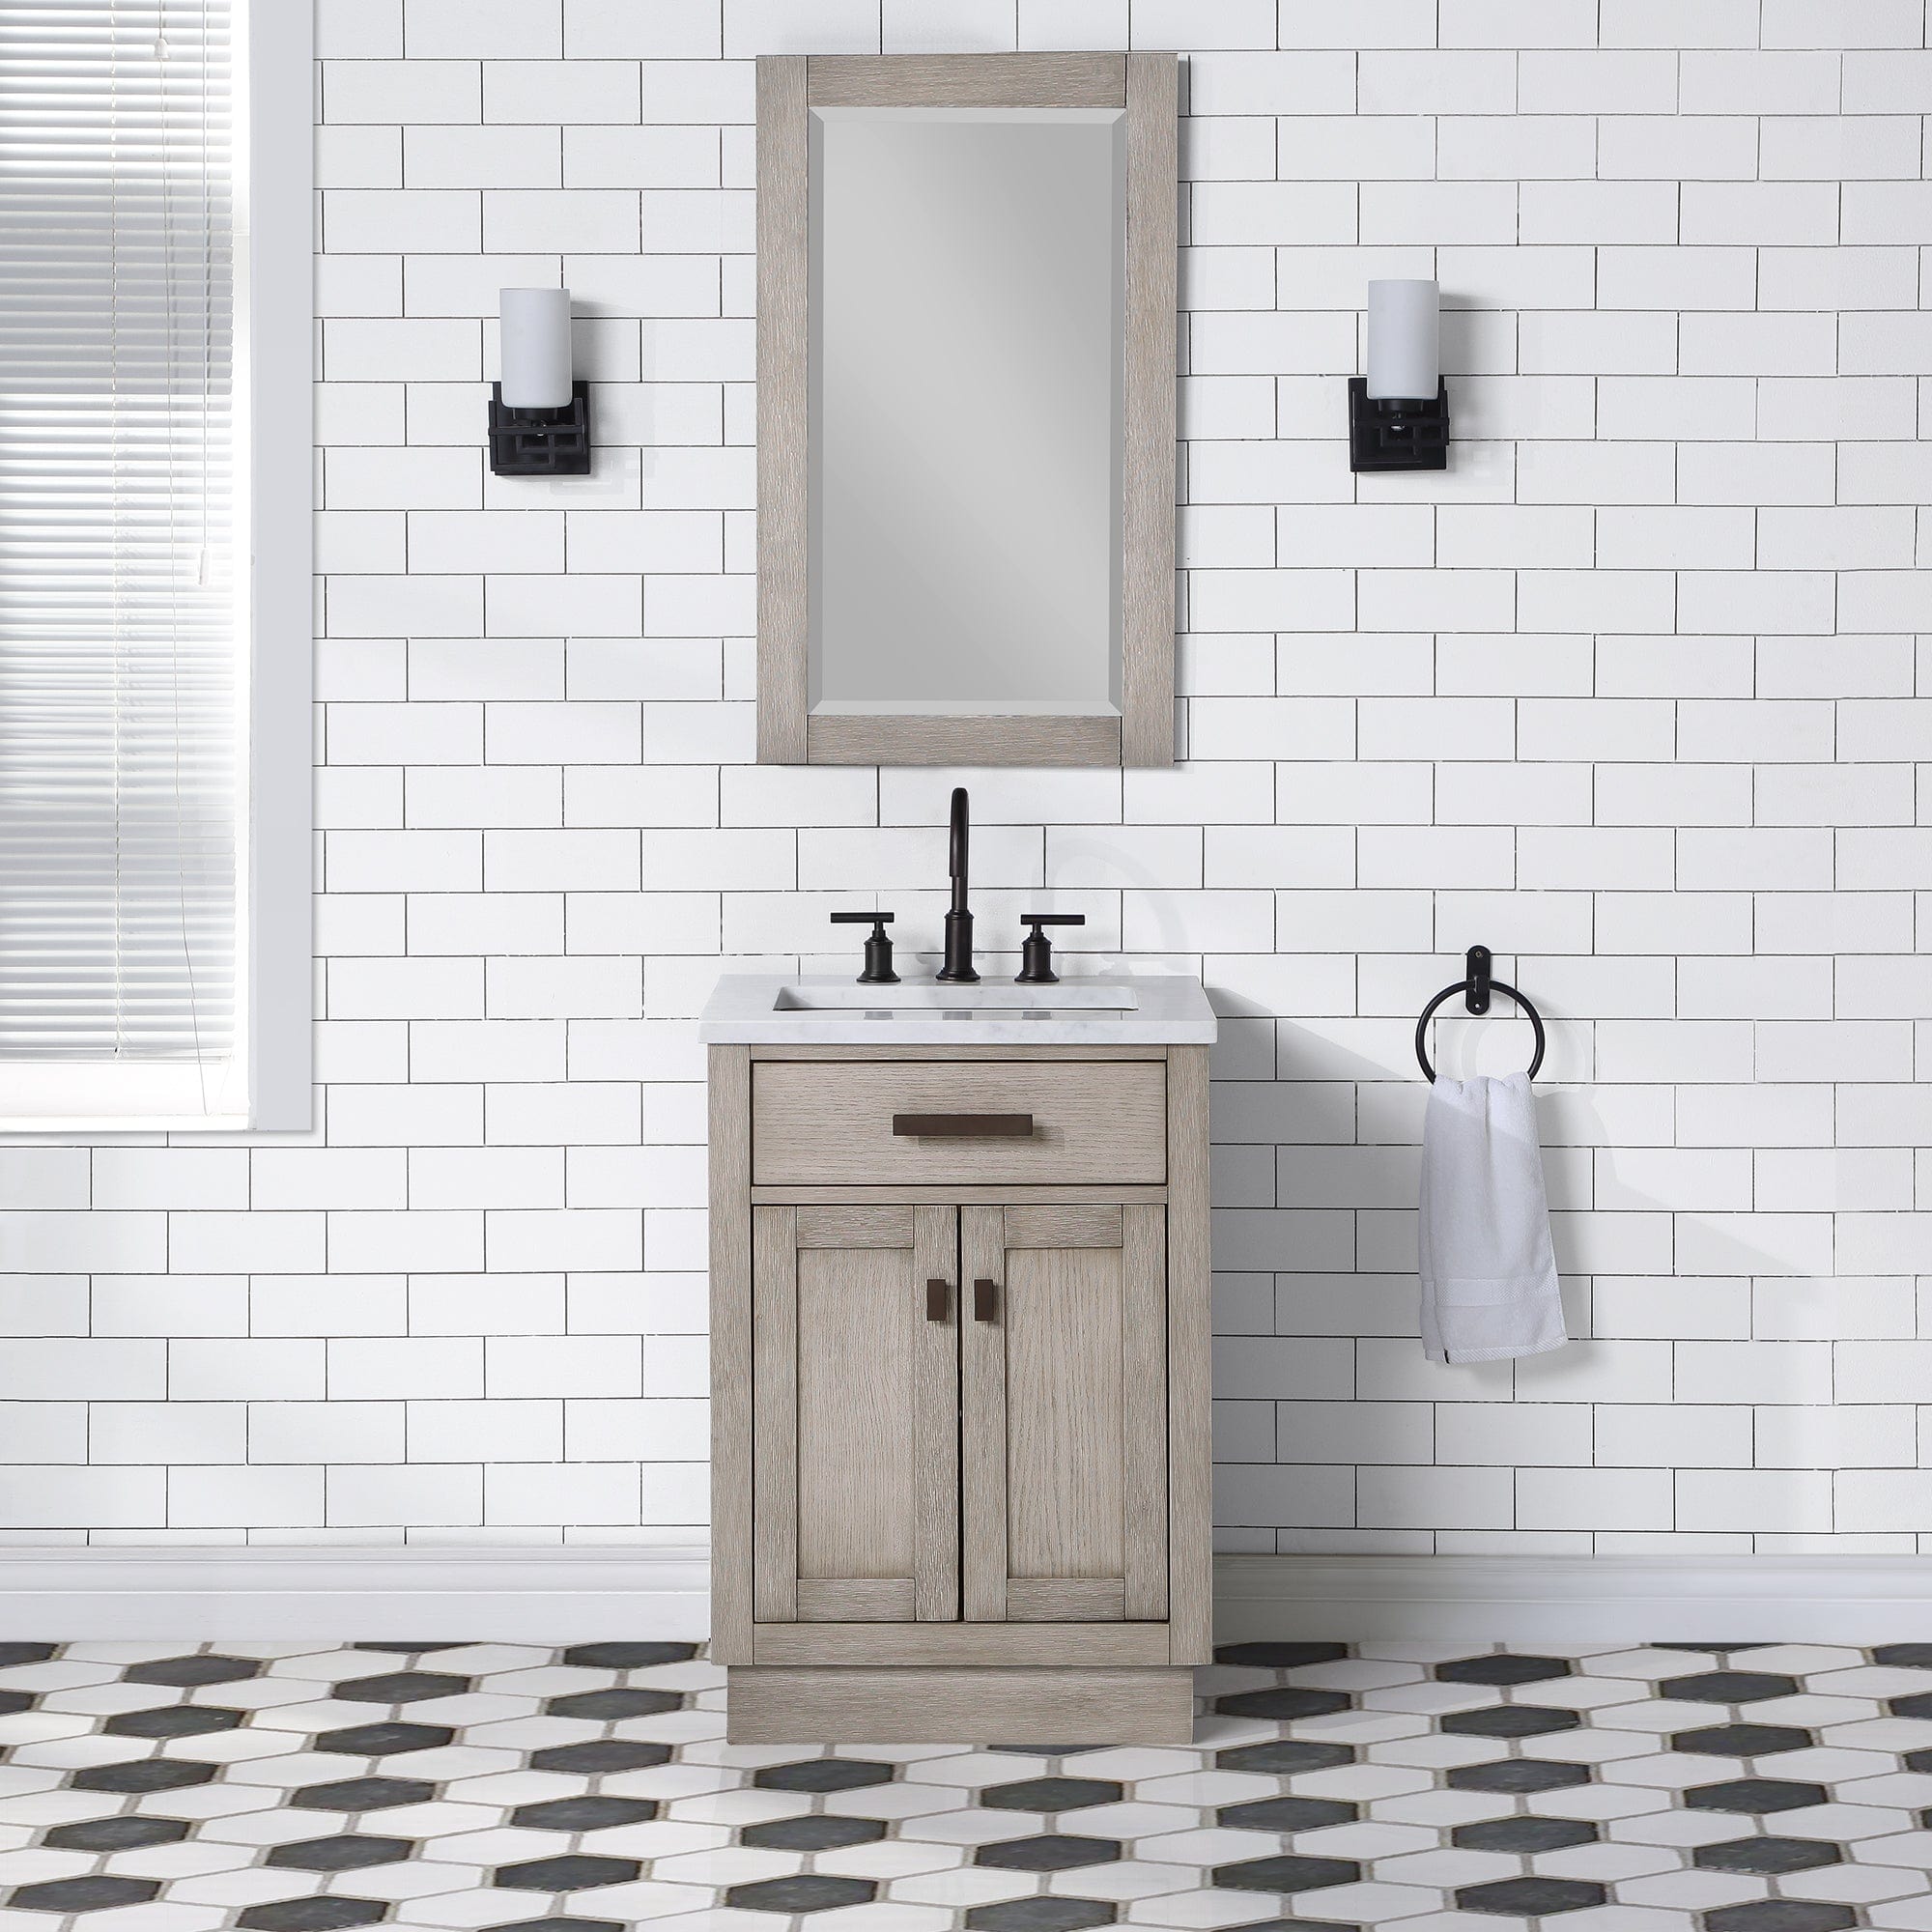 Chestnut 24 In. Single Sink Carrara White Marble Countertop Vanity In Grey Oak with Mirror - Molaix732030764552CH24CW03GK-R21000000